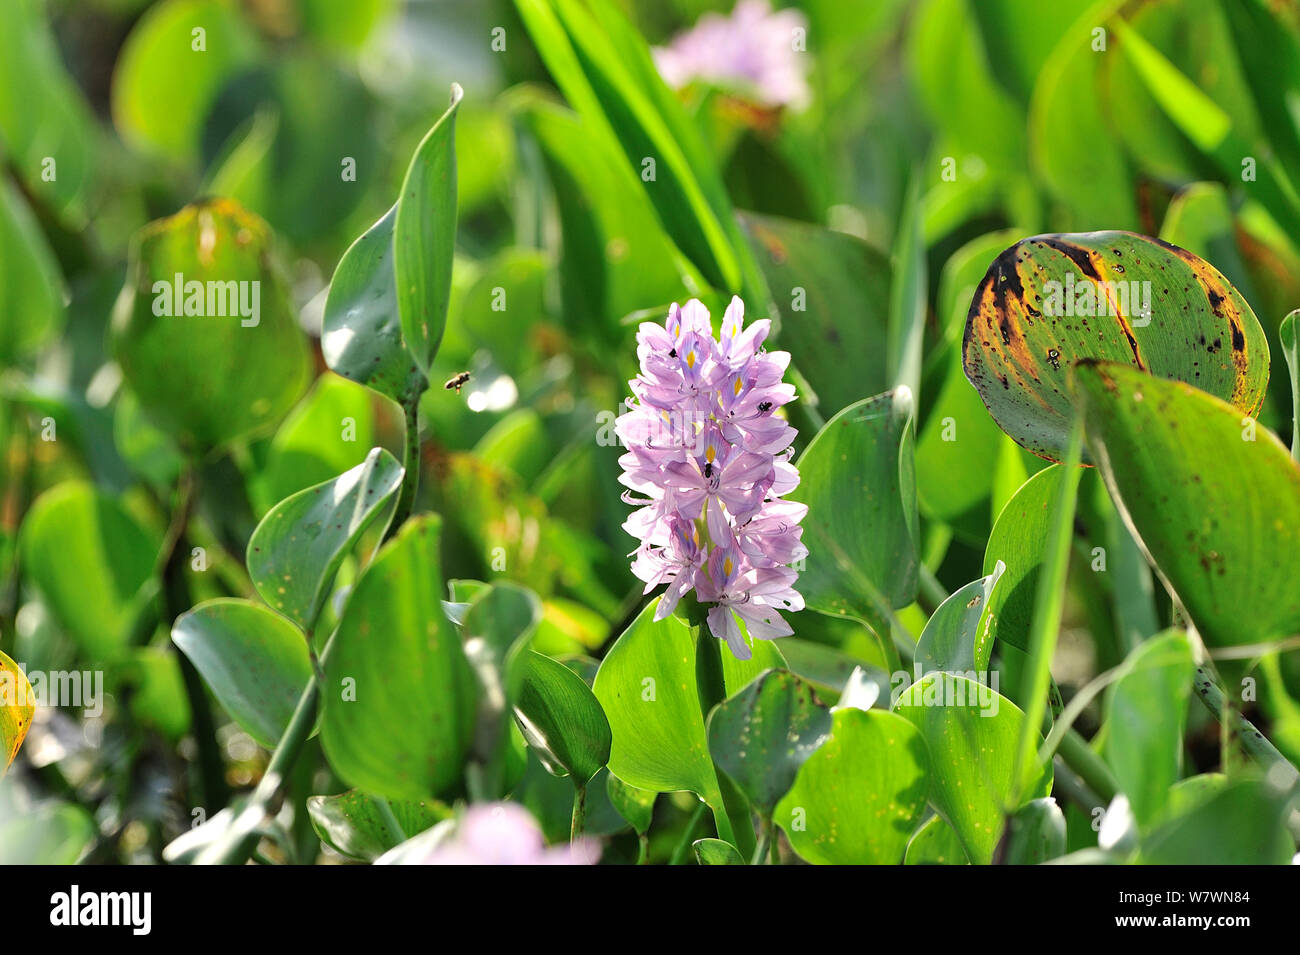 Common Water Hyacinth (Eichhornia crassipes) Pixaim River, Pantanal of Mato Grosso, Mato Grosso State, Western Brazil. Stock Photo